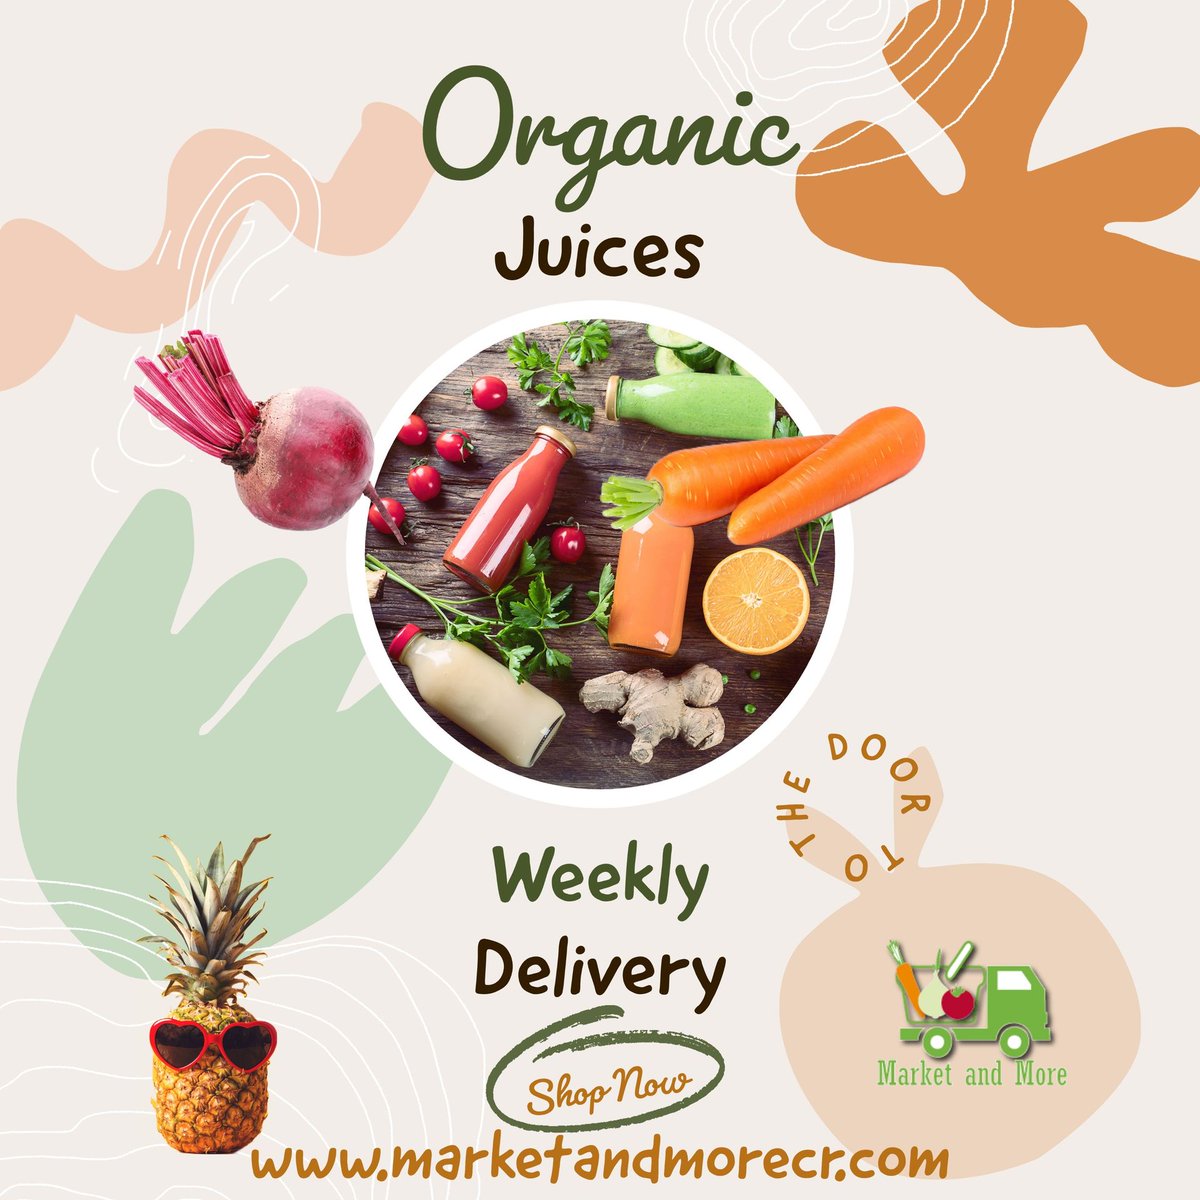 🍃🥤 Sip, savor, and revitalize with the pure goodness of organic juice! 🌈🍊 Experience nature's vibrant flavors and nourishing benefits in every refreshing drop. #OrganicJuice #FreshAndHealthy #NaturalRevitalization #JuiceGoals